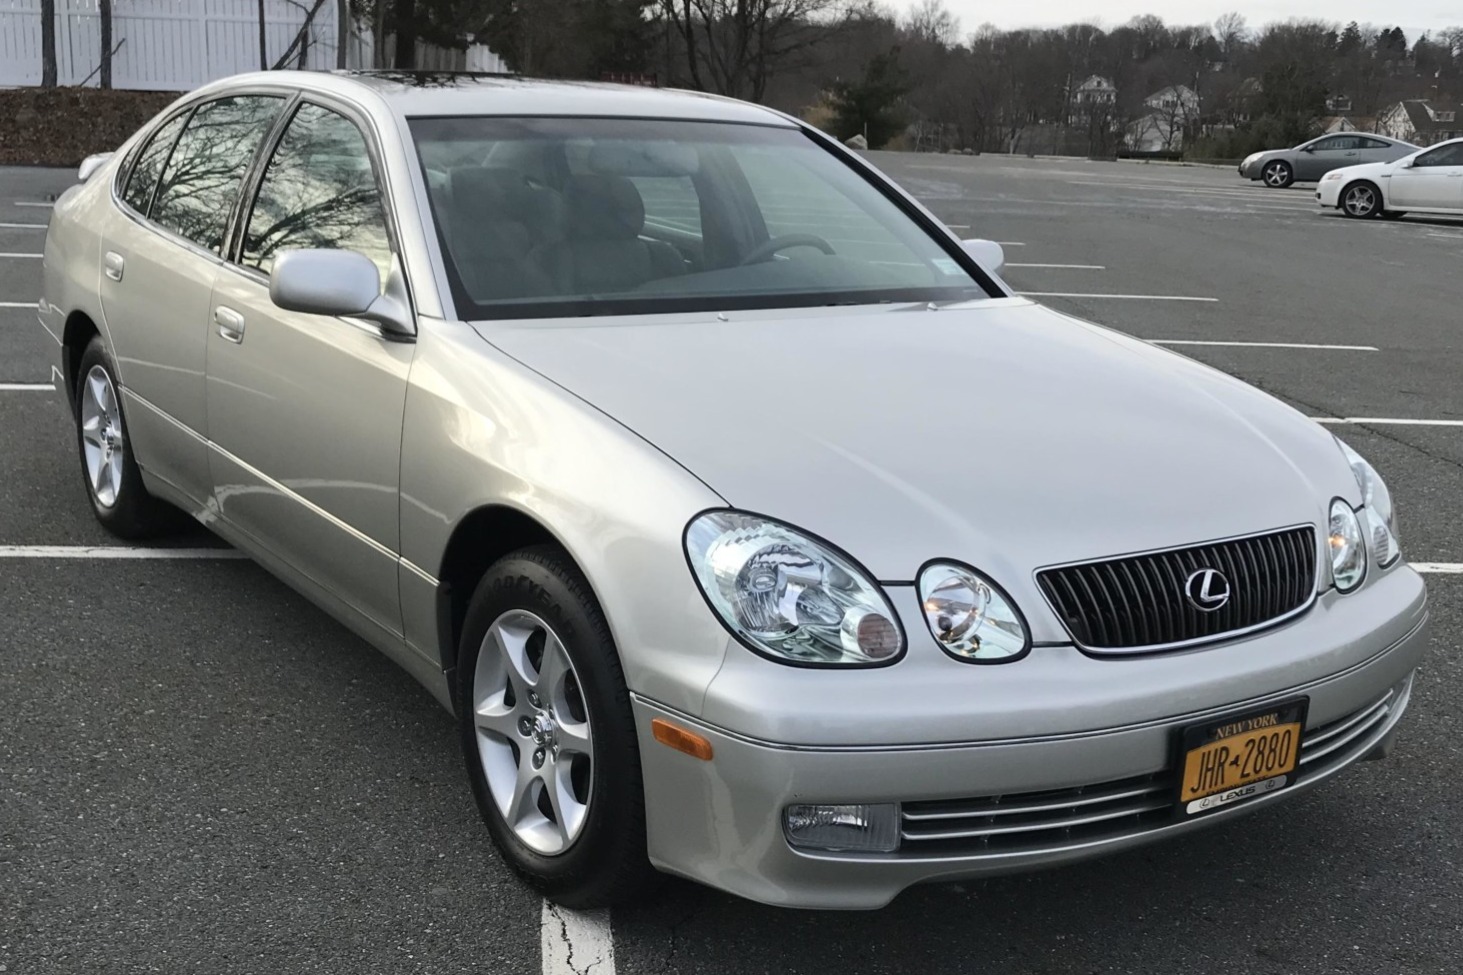 8k-Mile 2001 Lexus GS300 for sale on BaT Auctions - sold for $15,299 on  March 19, 2020 (Lot #29,215) | Bring a Trailer